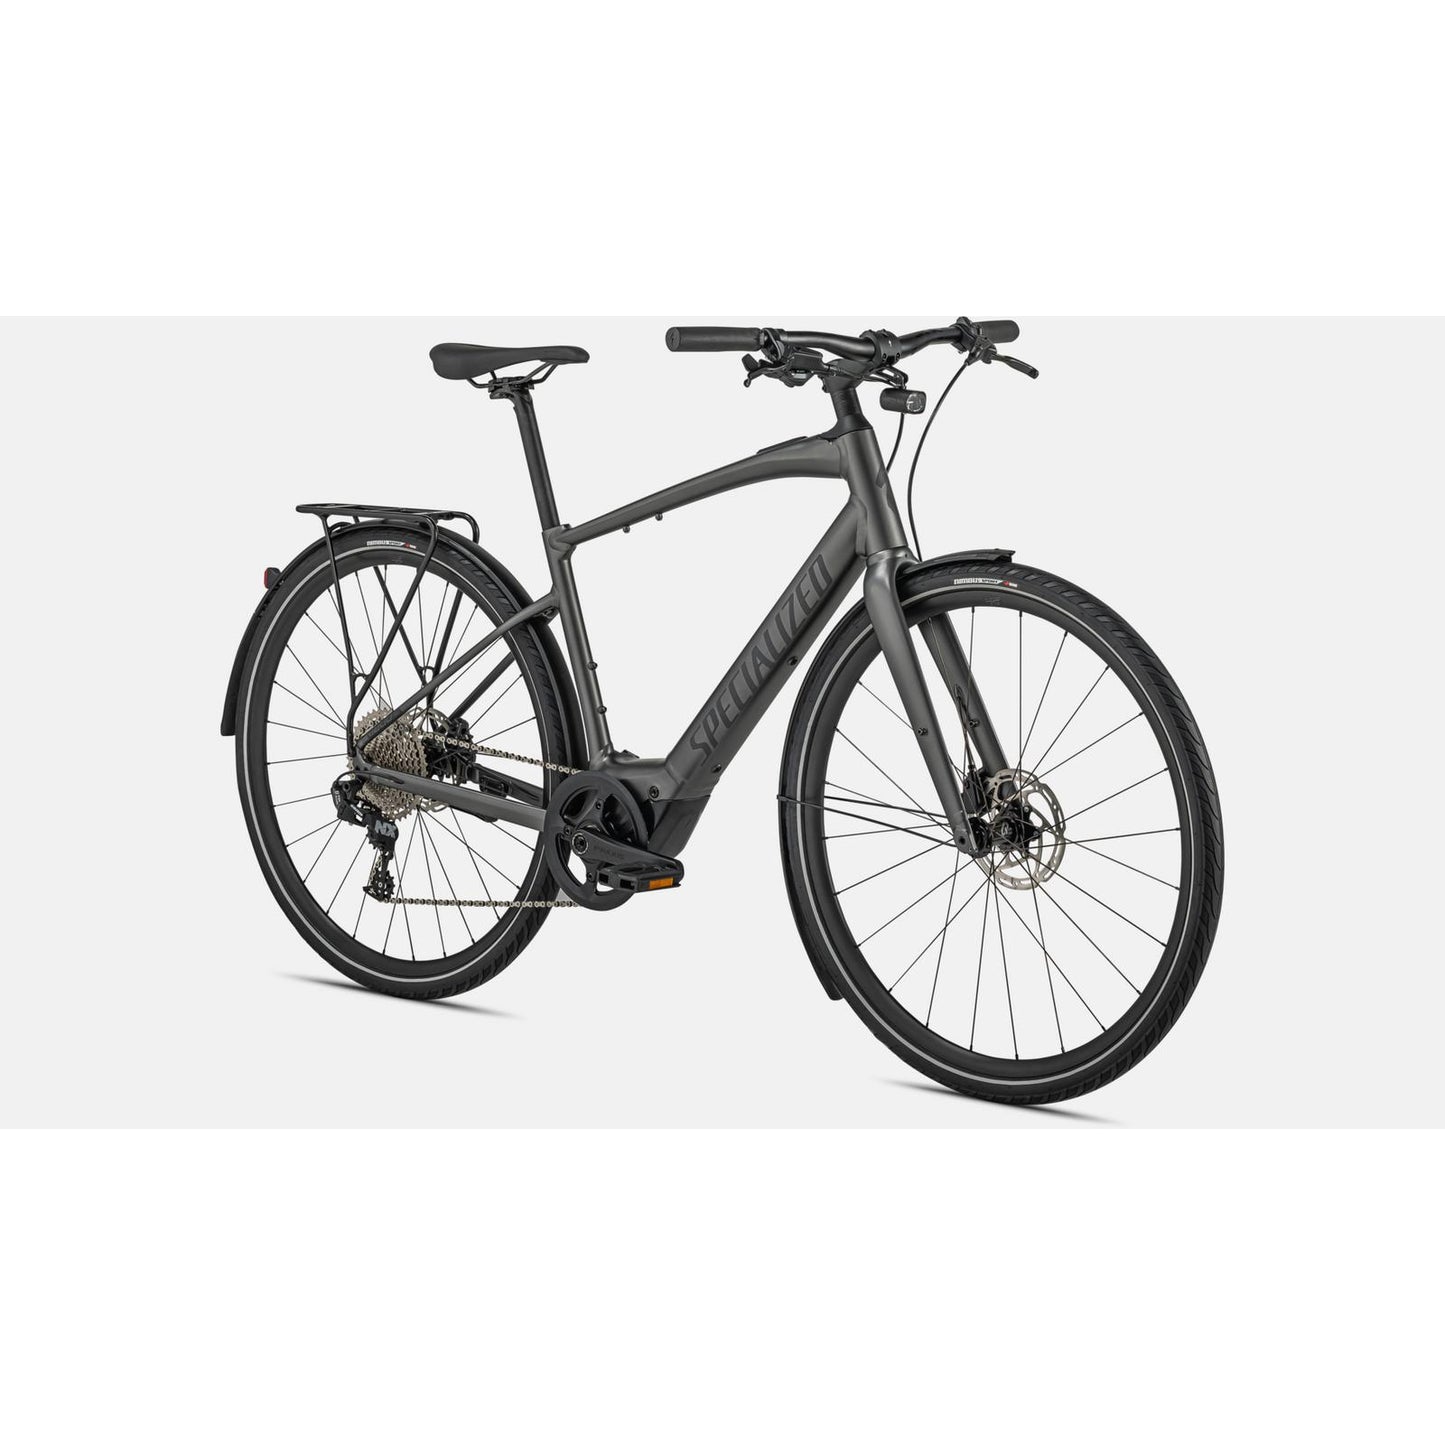 Specialized Turbo Vado SL 4.0 EQ Active Electric Bike - Bikes - Bicycle Warehouse